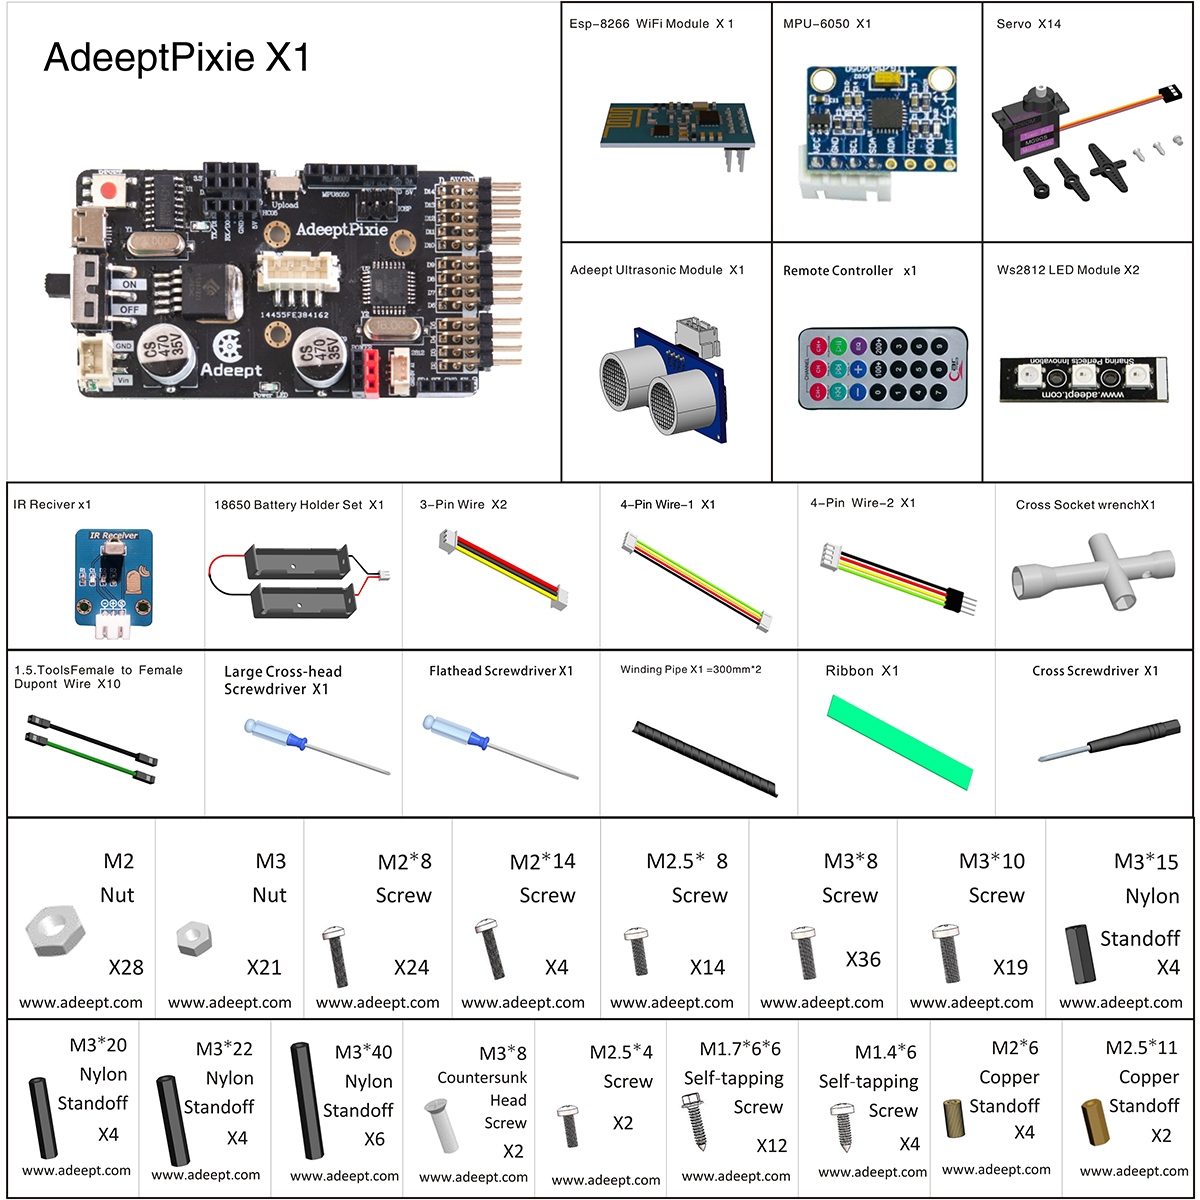 Adeept Quadruped Spider Robot Kit with Pixie X1 Microcontroller - Click to Enlarge